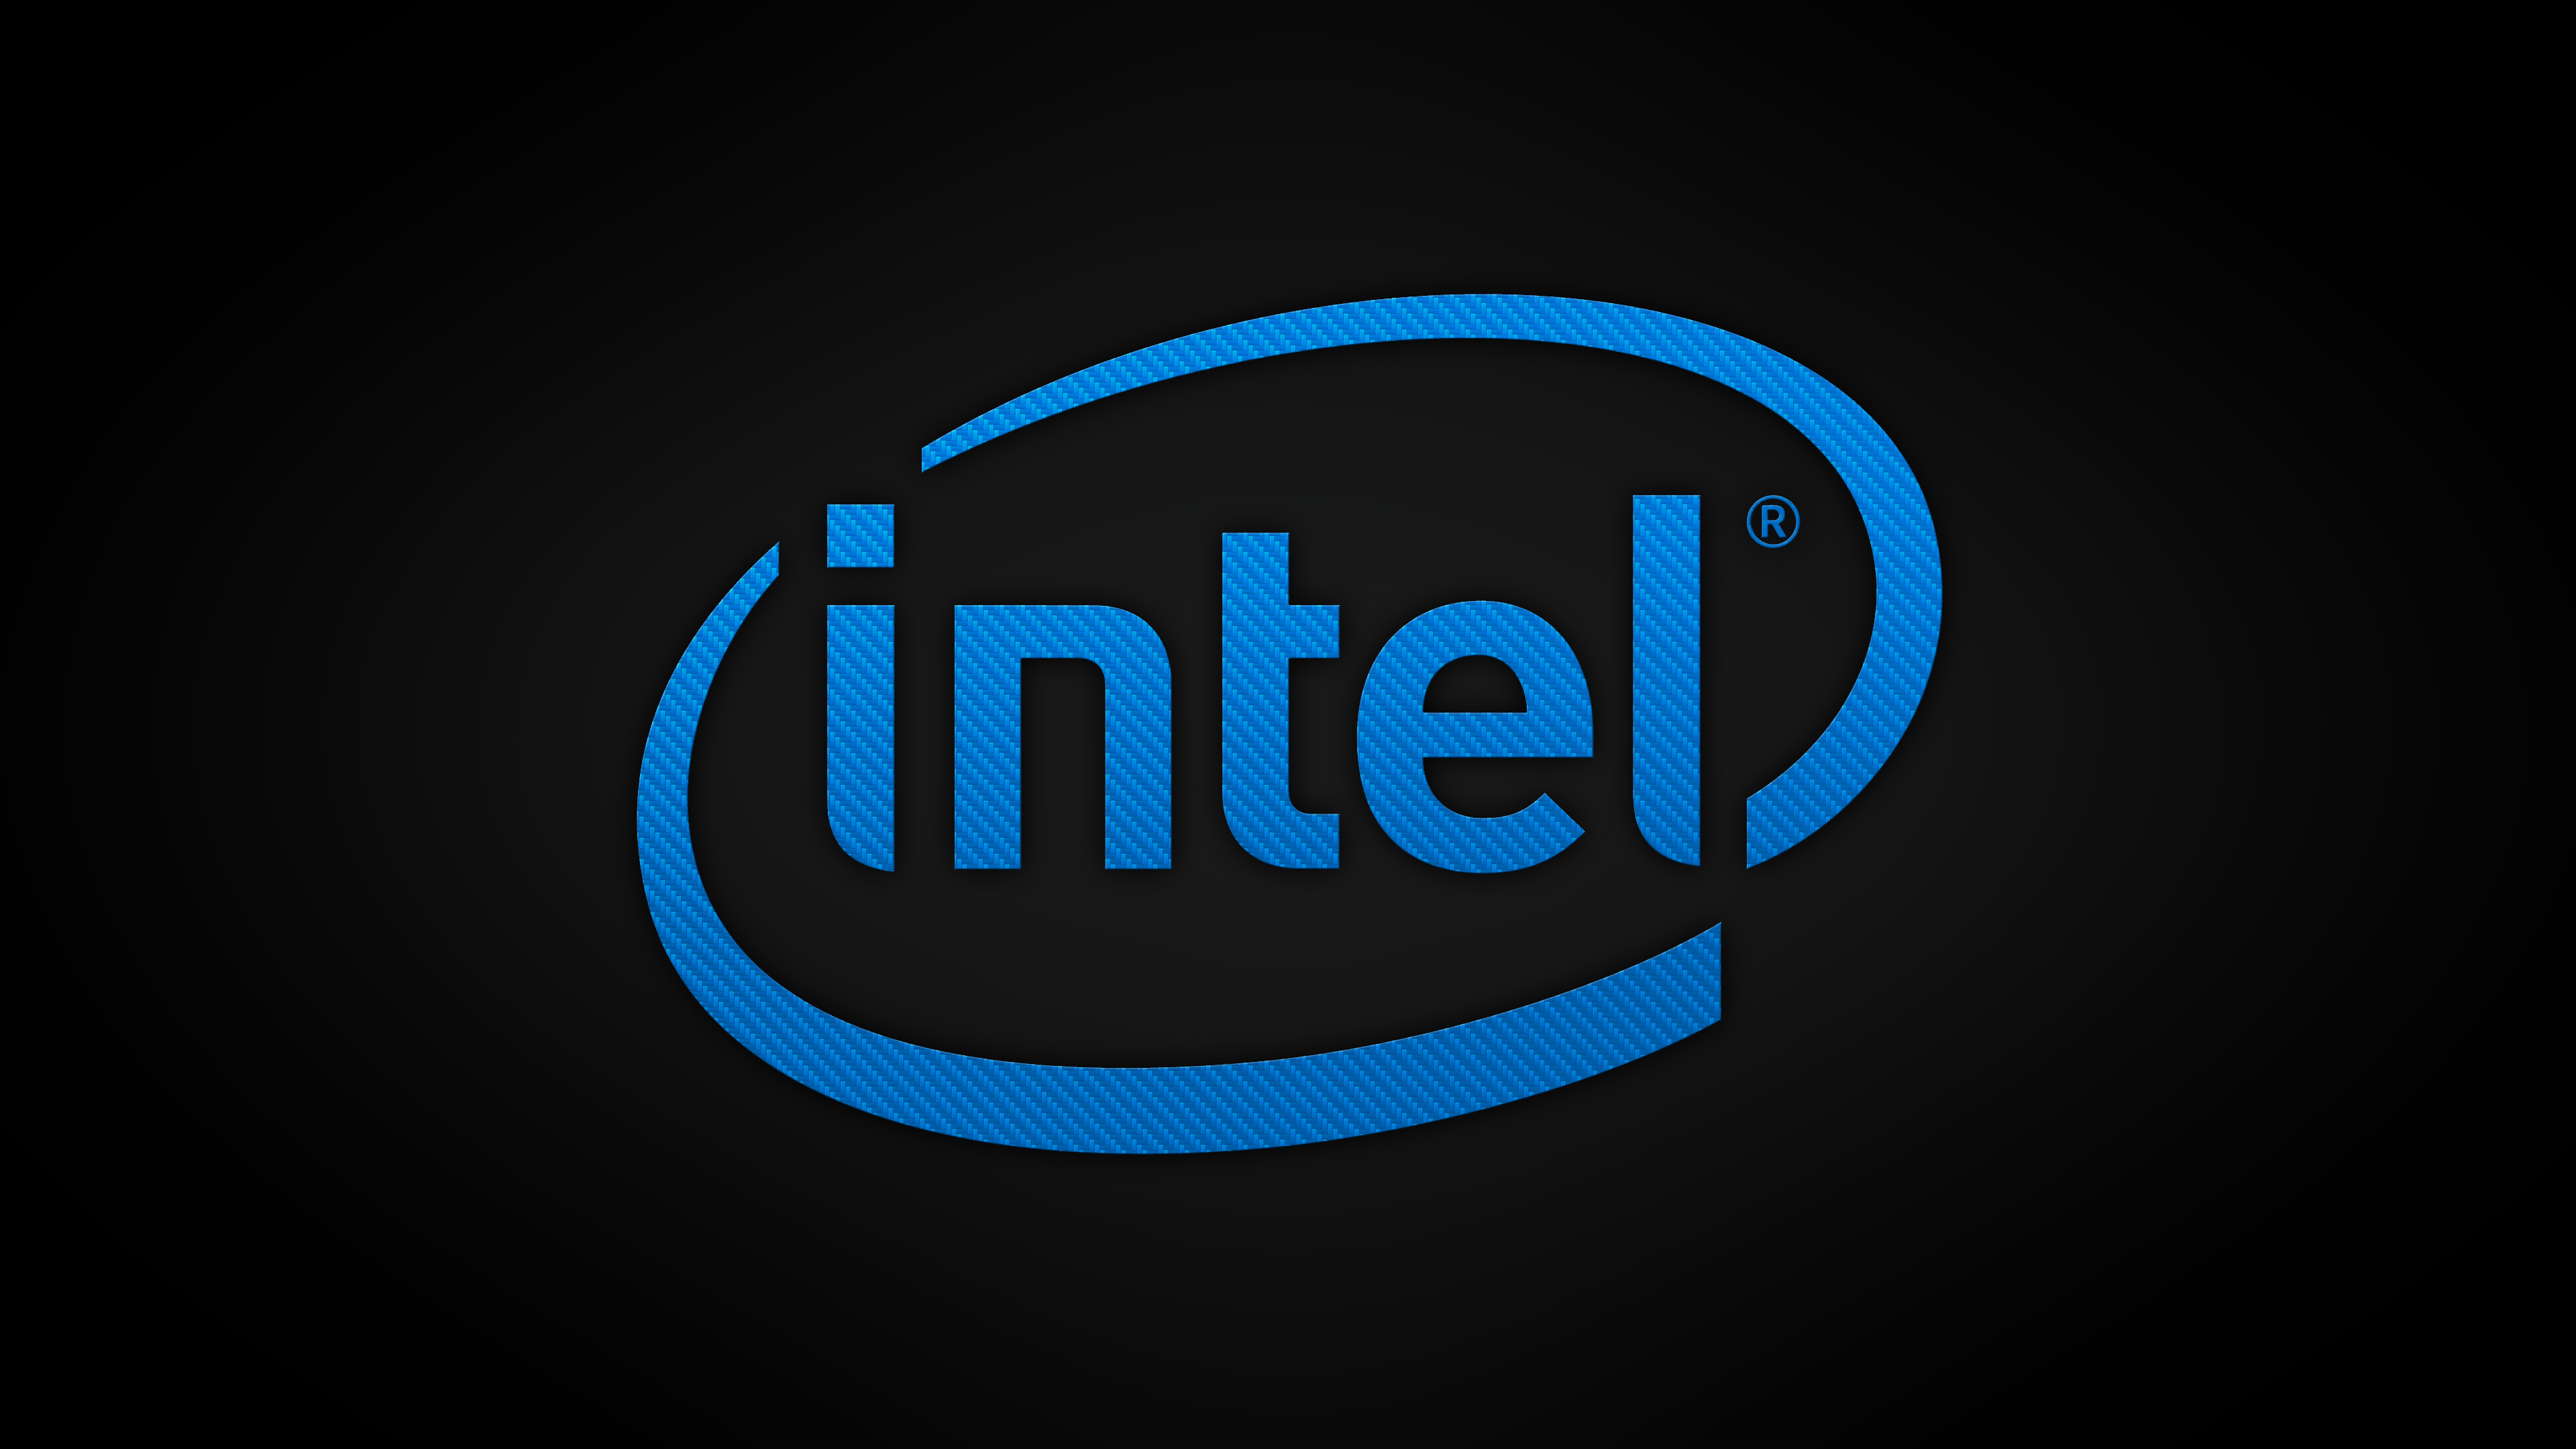 Intel Brand Logo, HD Logo, 4k Wallpaper, Image, Background, Photo and Picture